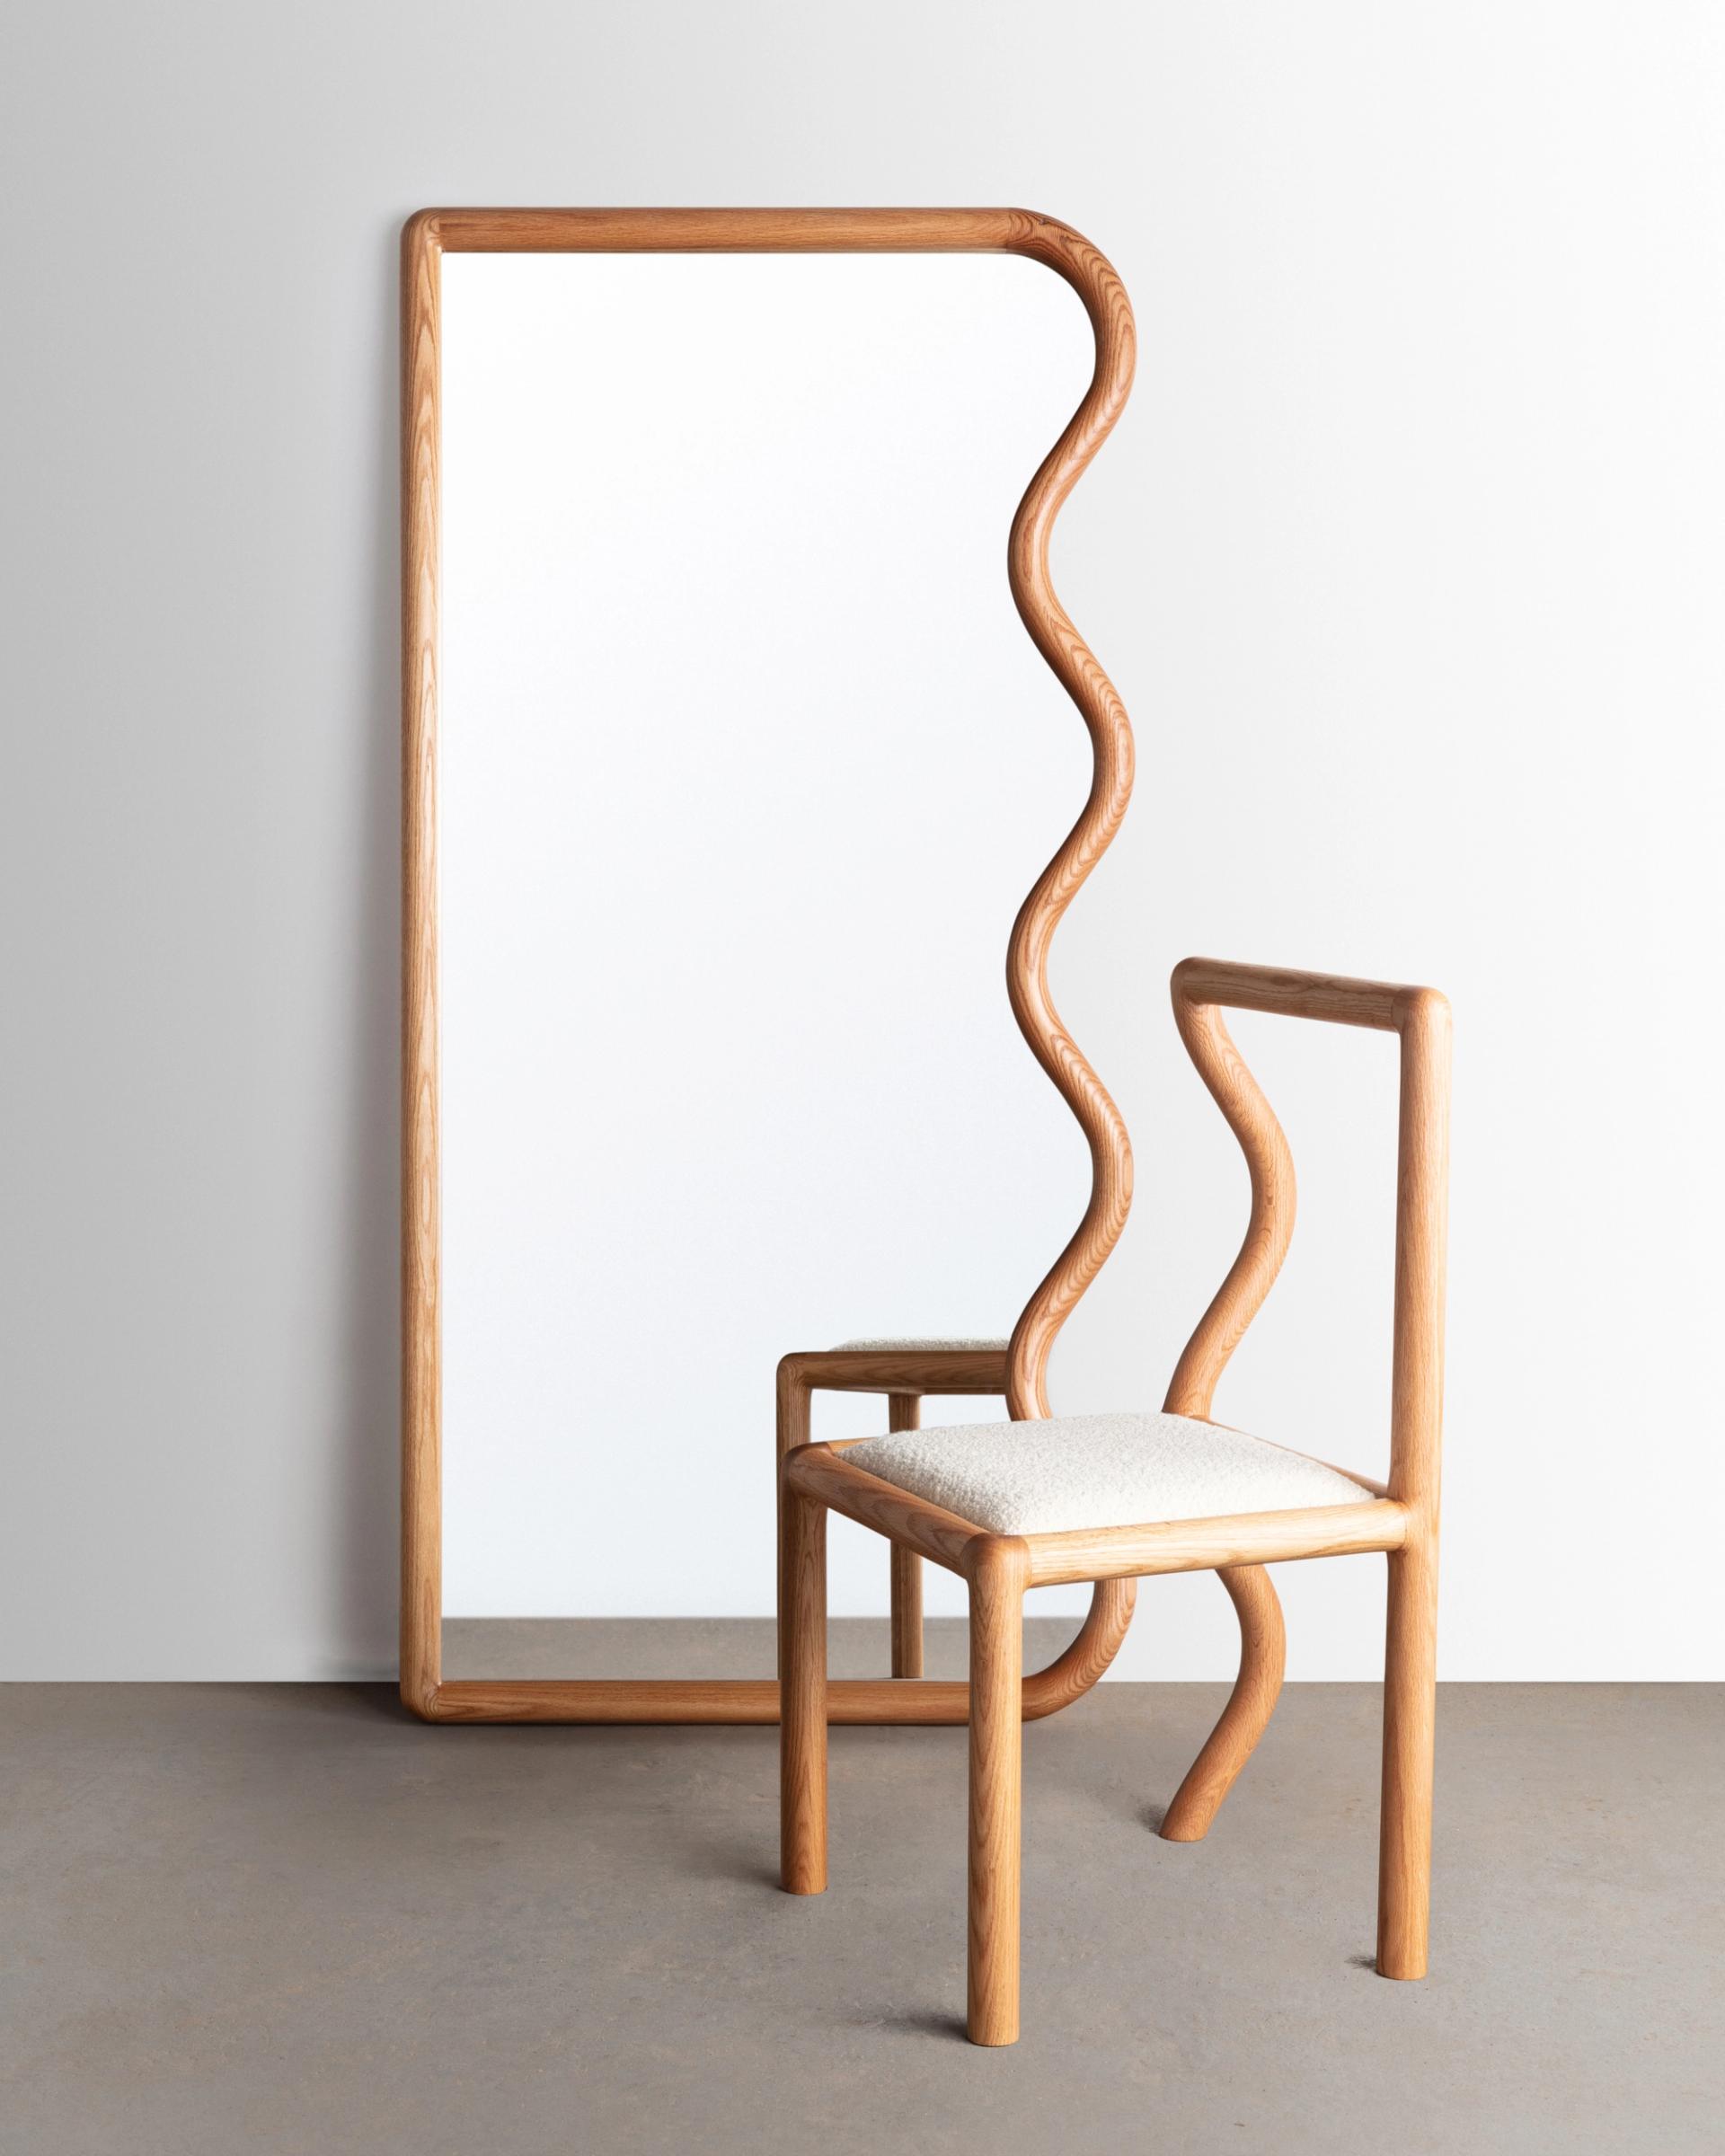 Squiggle Mirror